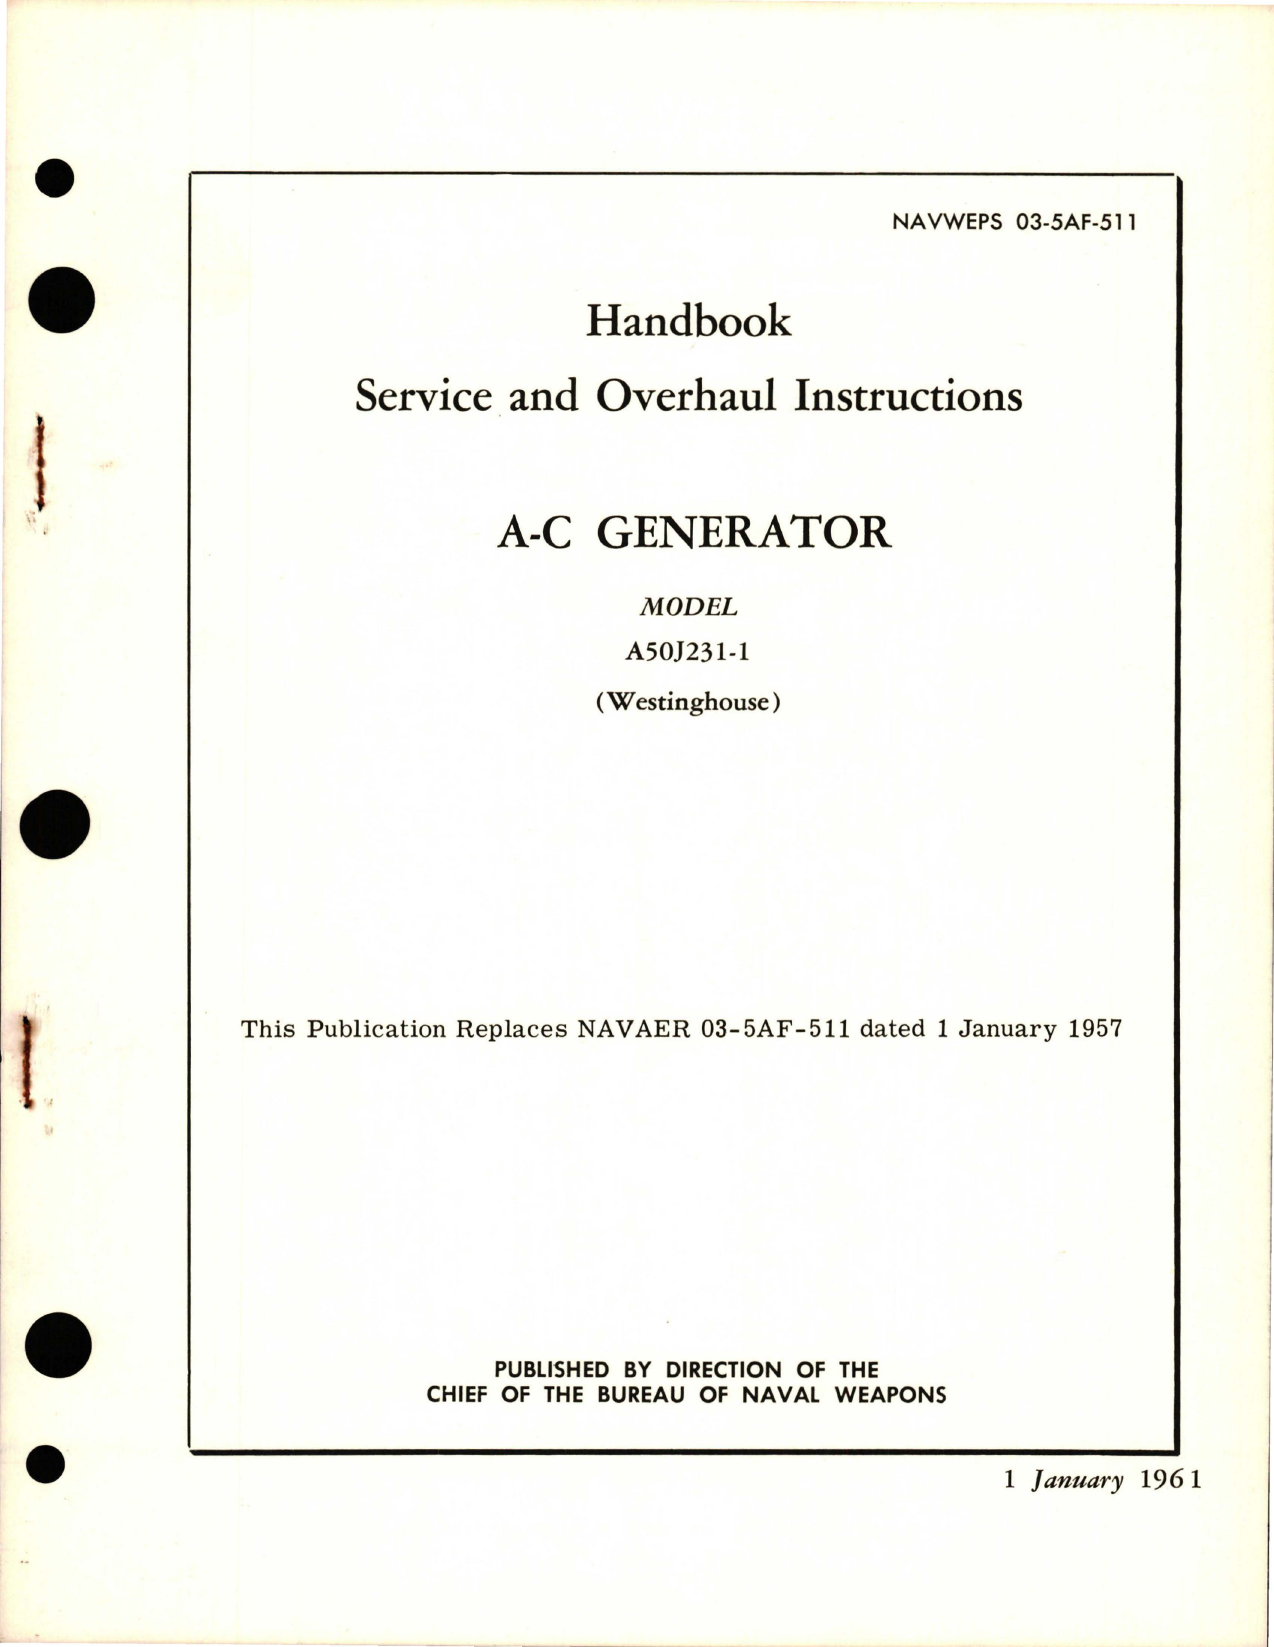 Sample page 1 from AirCorps Library document: Service and Overhaul Instructions for AC Generator - Model A50J231-1